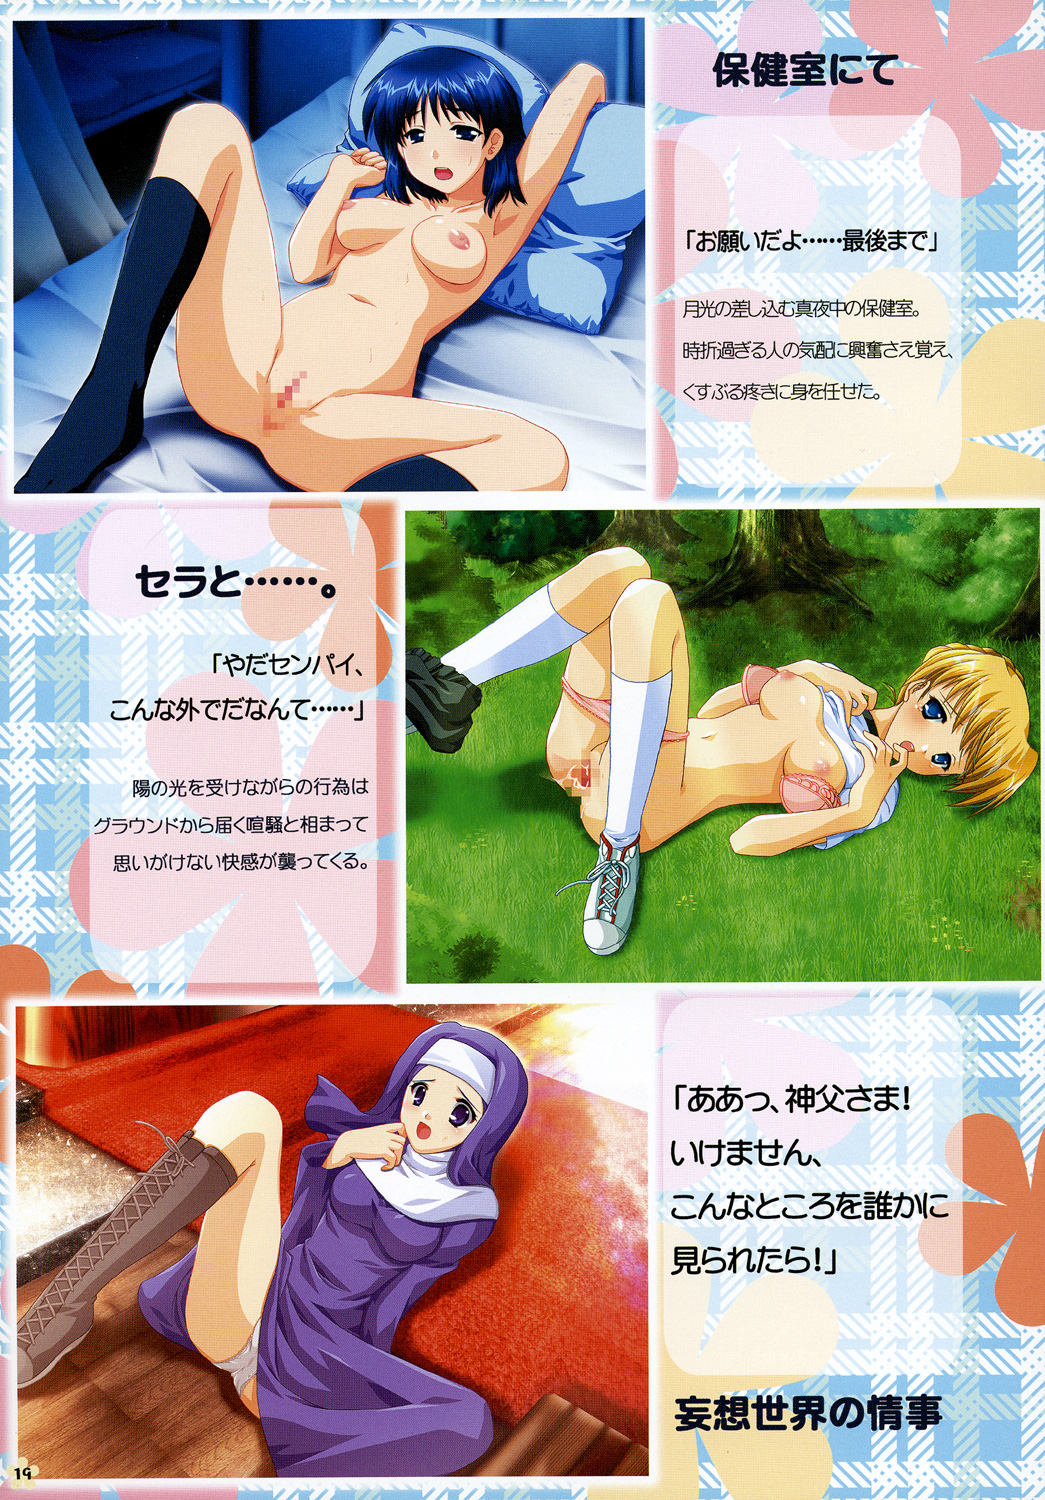 [AKABEi SOFT] SCHOOL×SCHOLL Visual Guide page 18 full